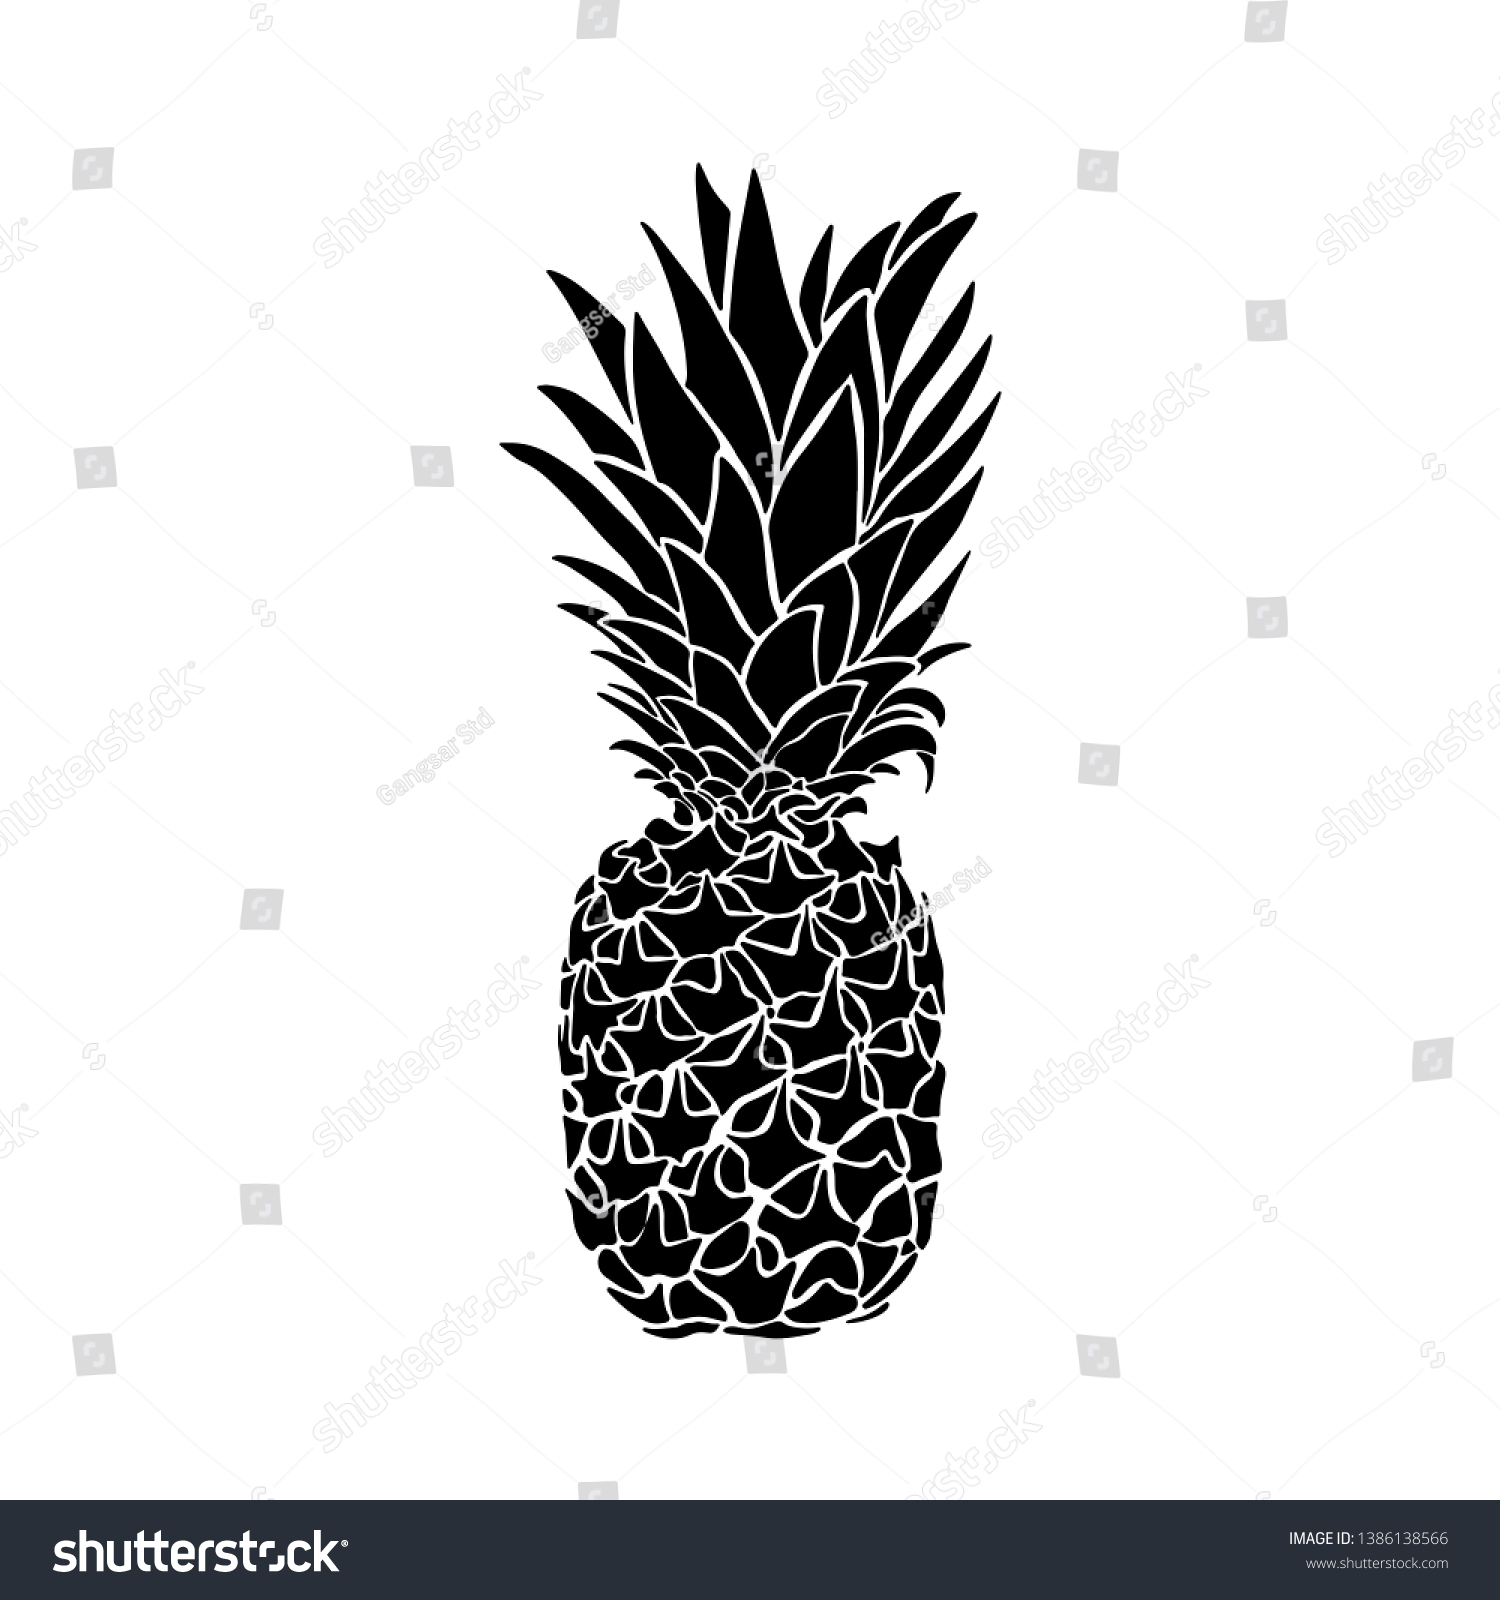 SVG of Hand Drawn pineapple shilloutte. Tropical fruit isolated on white background. Black and white print of pineapple svg